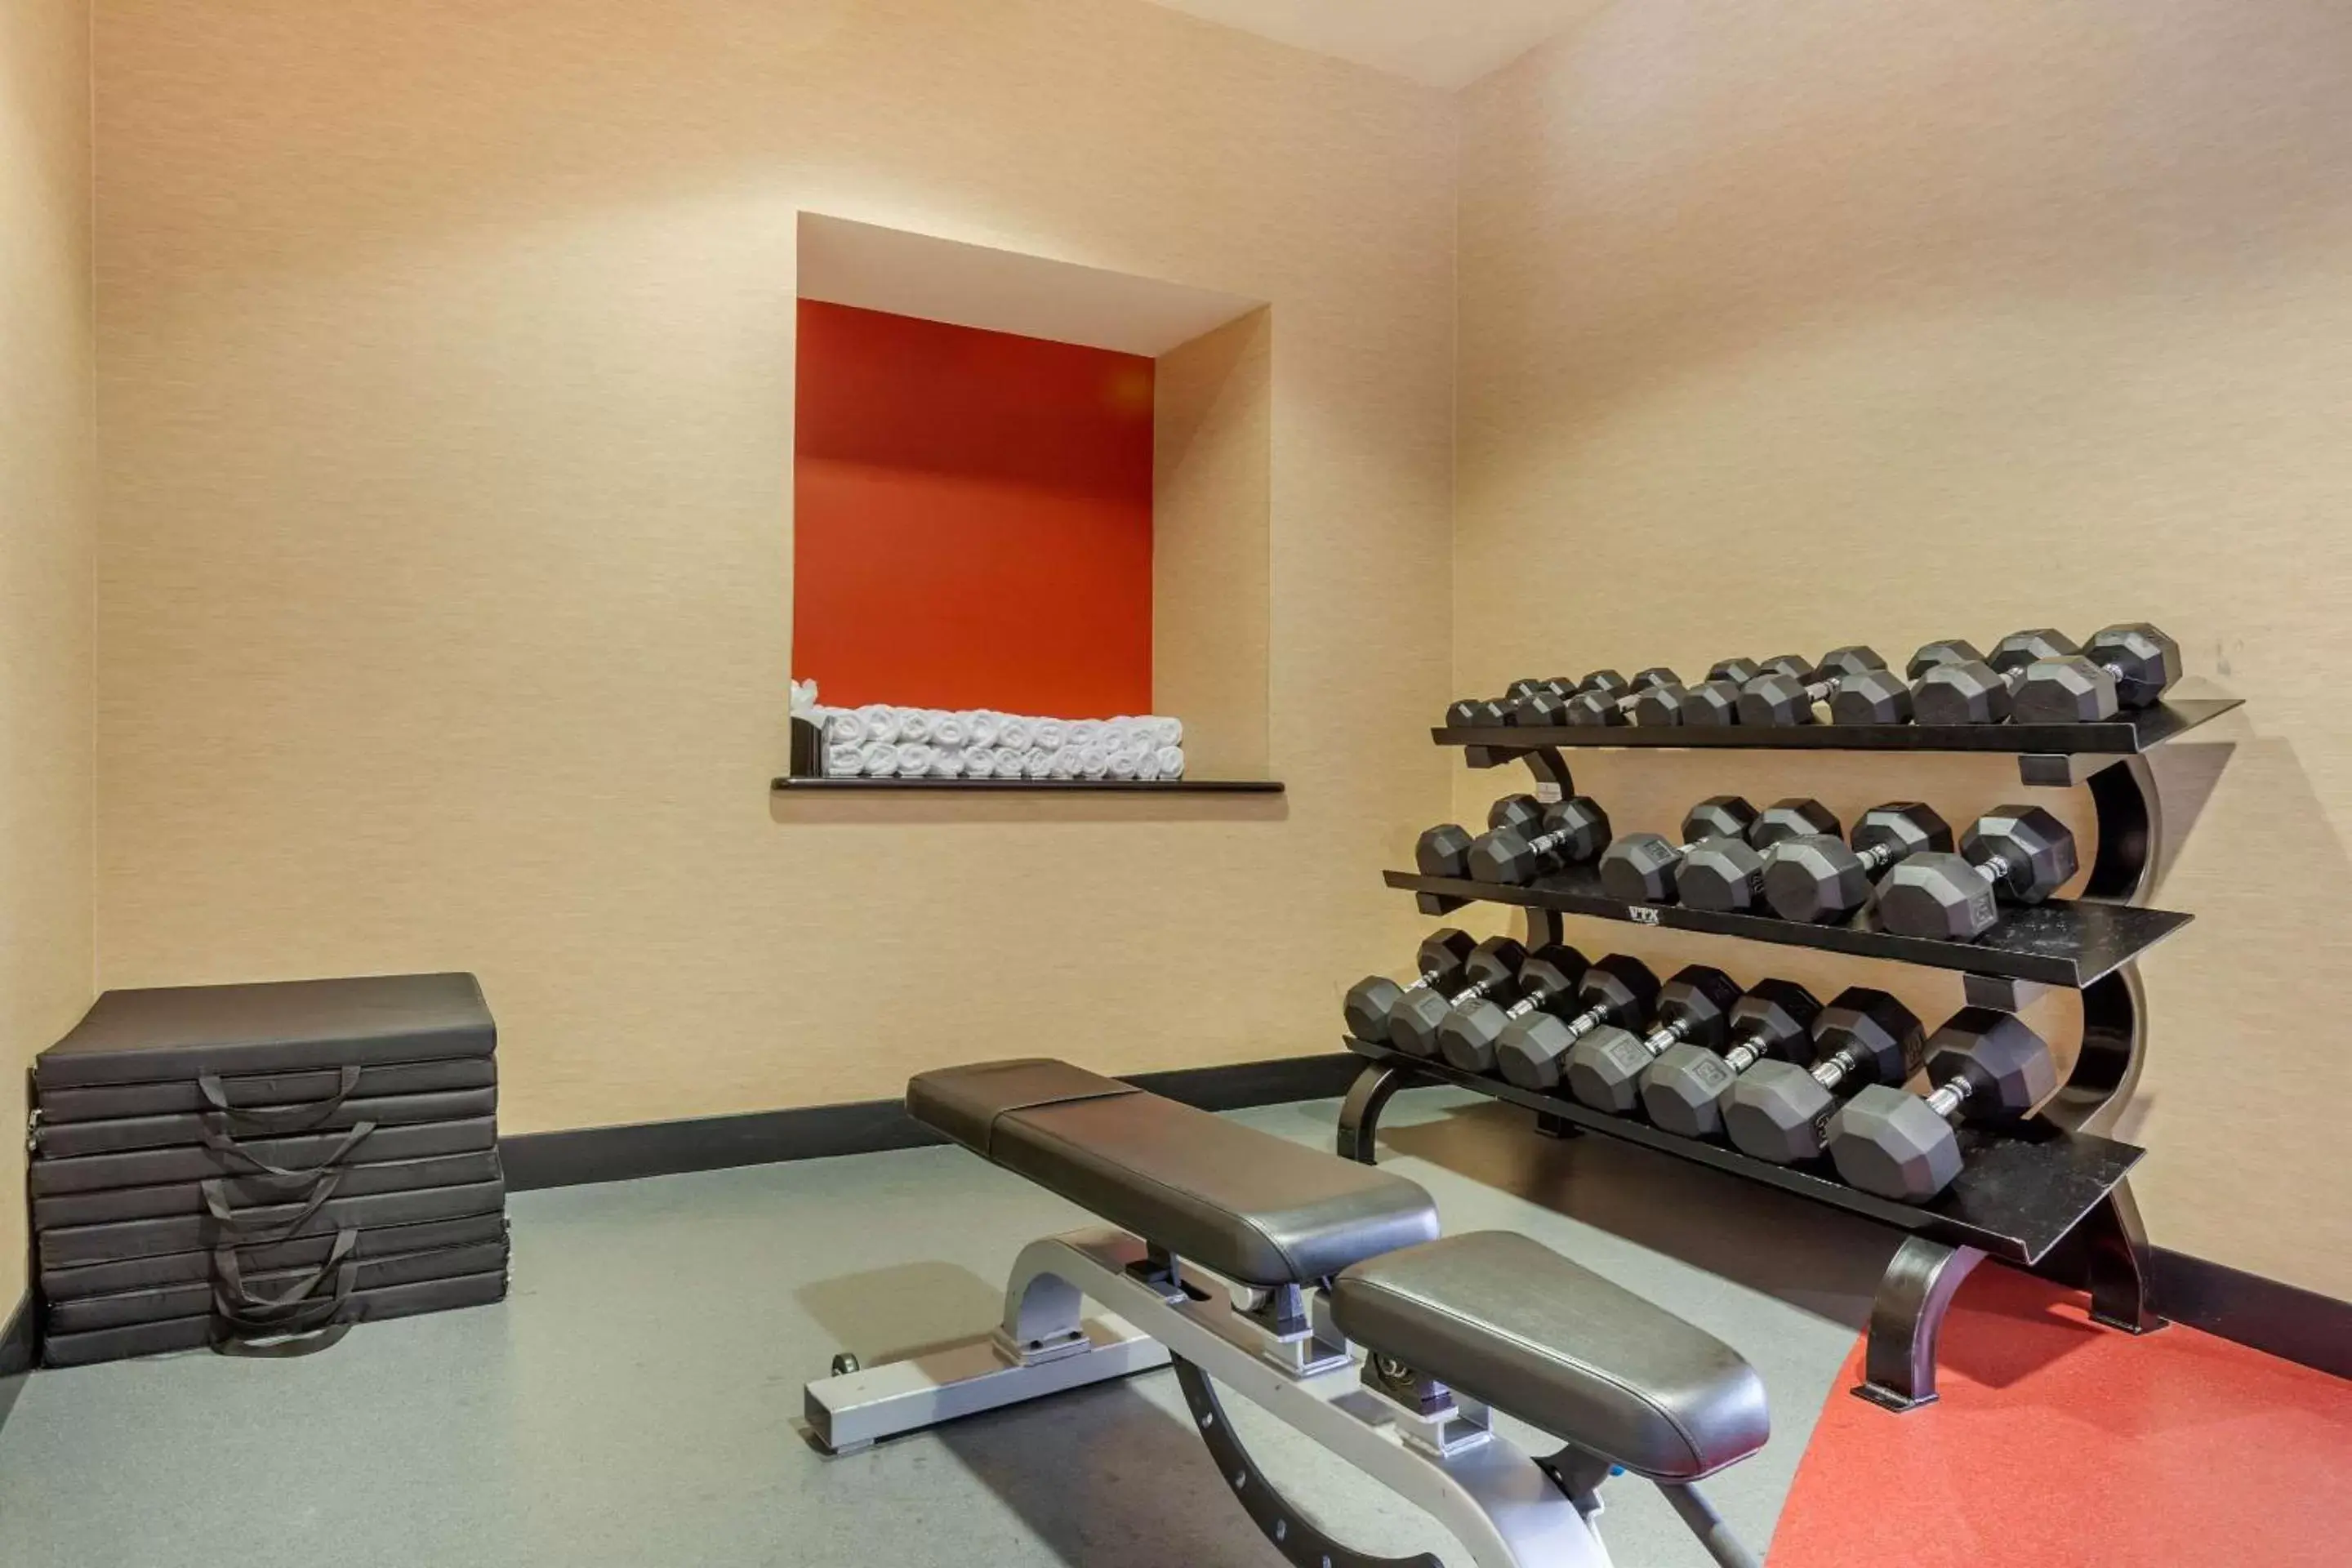 Fitness centre/facilities, Fitness Center/Facilities in Cambria Hotel Denver International Airport